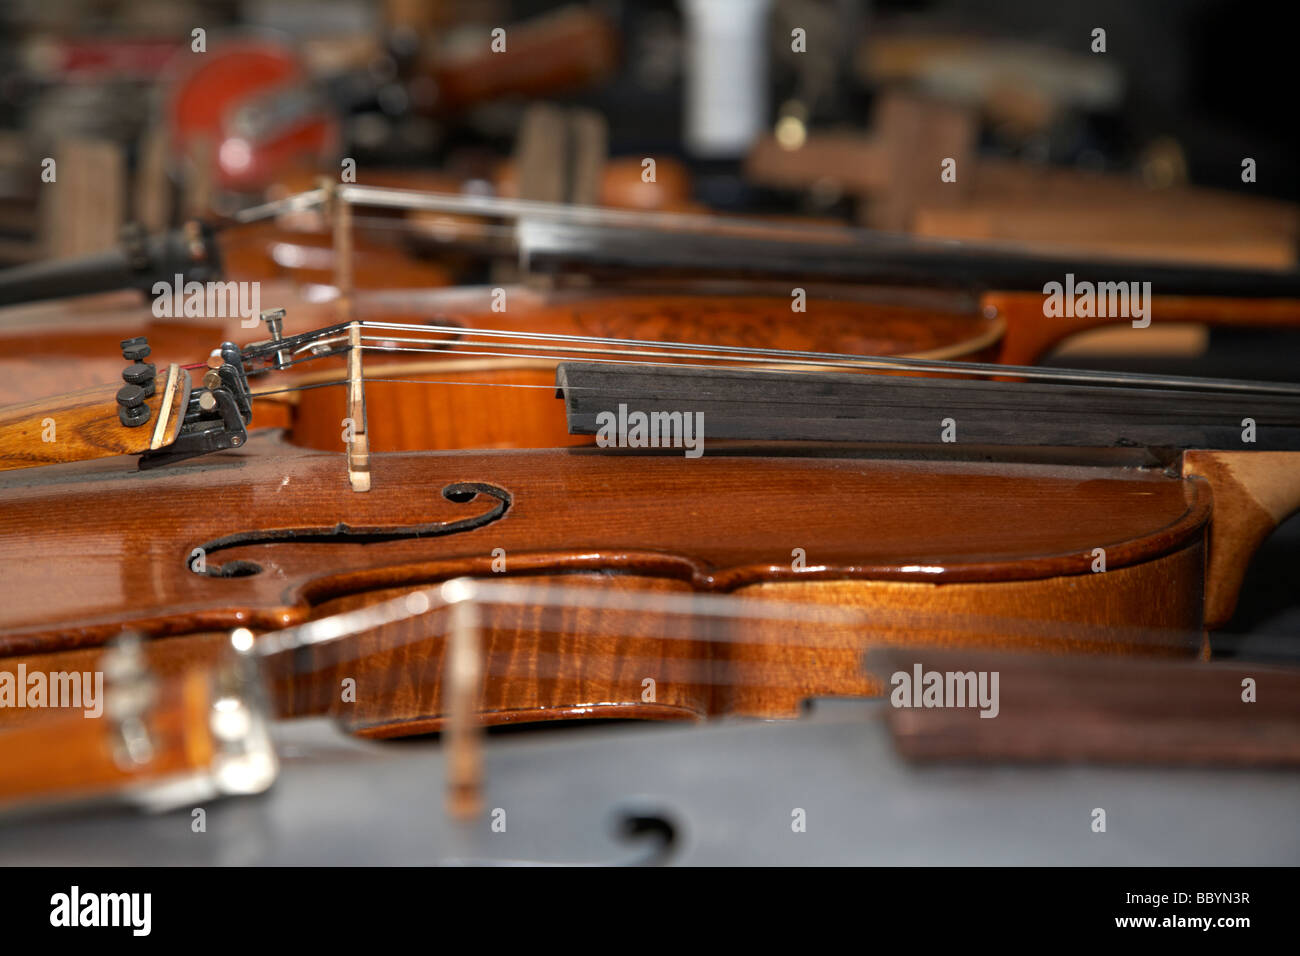 homemade handmade violins made of different materials and shapes on display Stock Photo